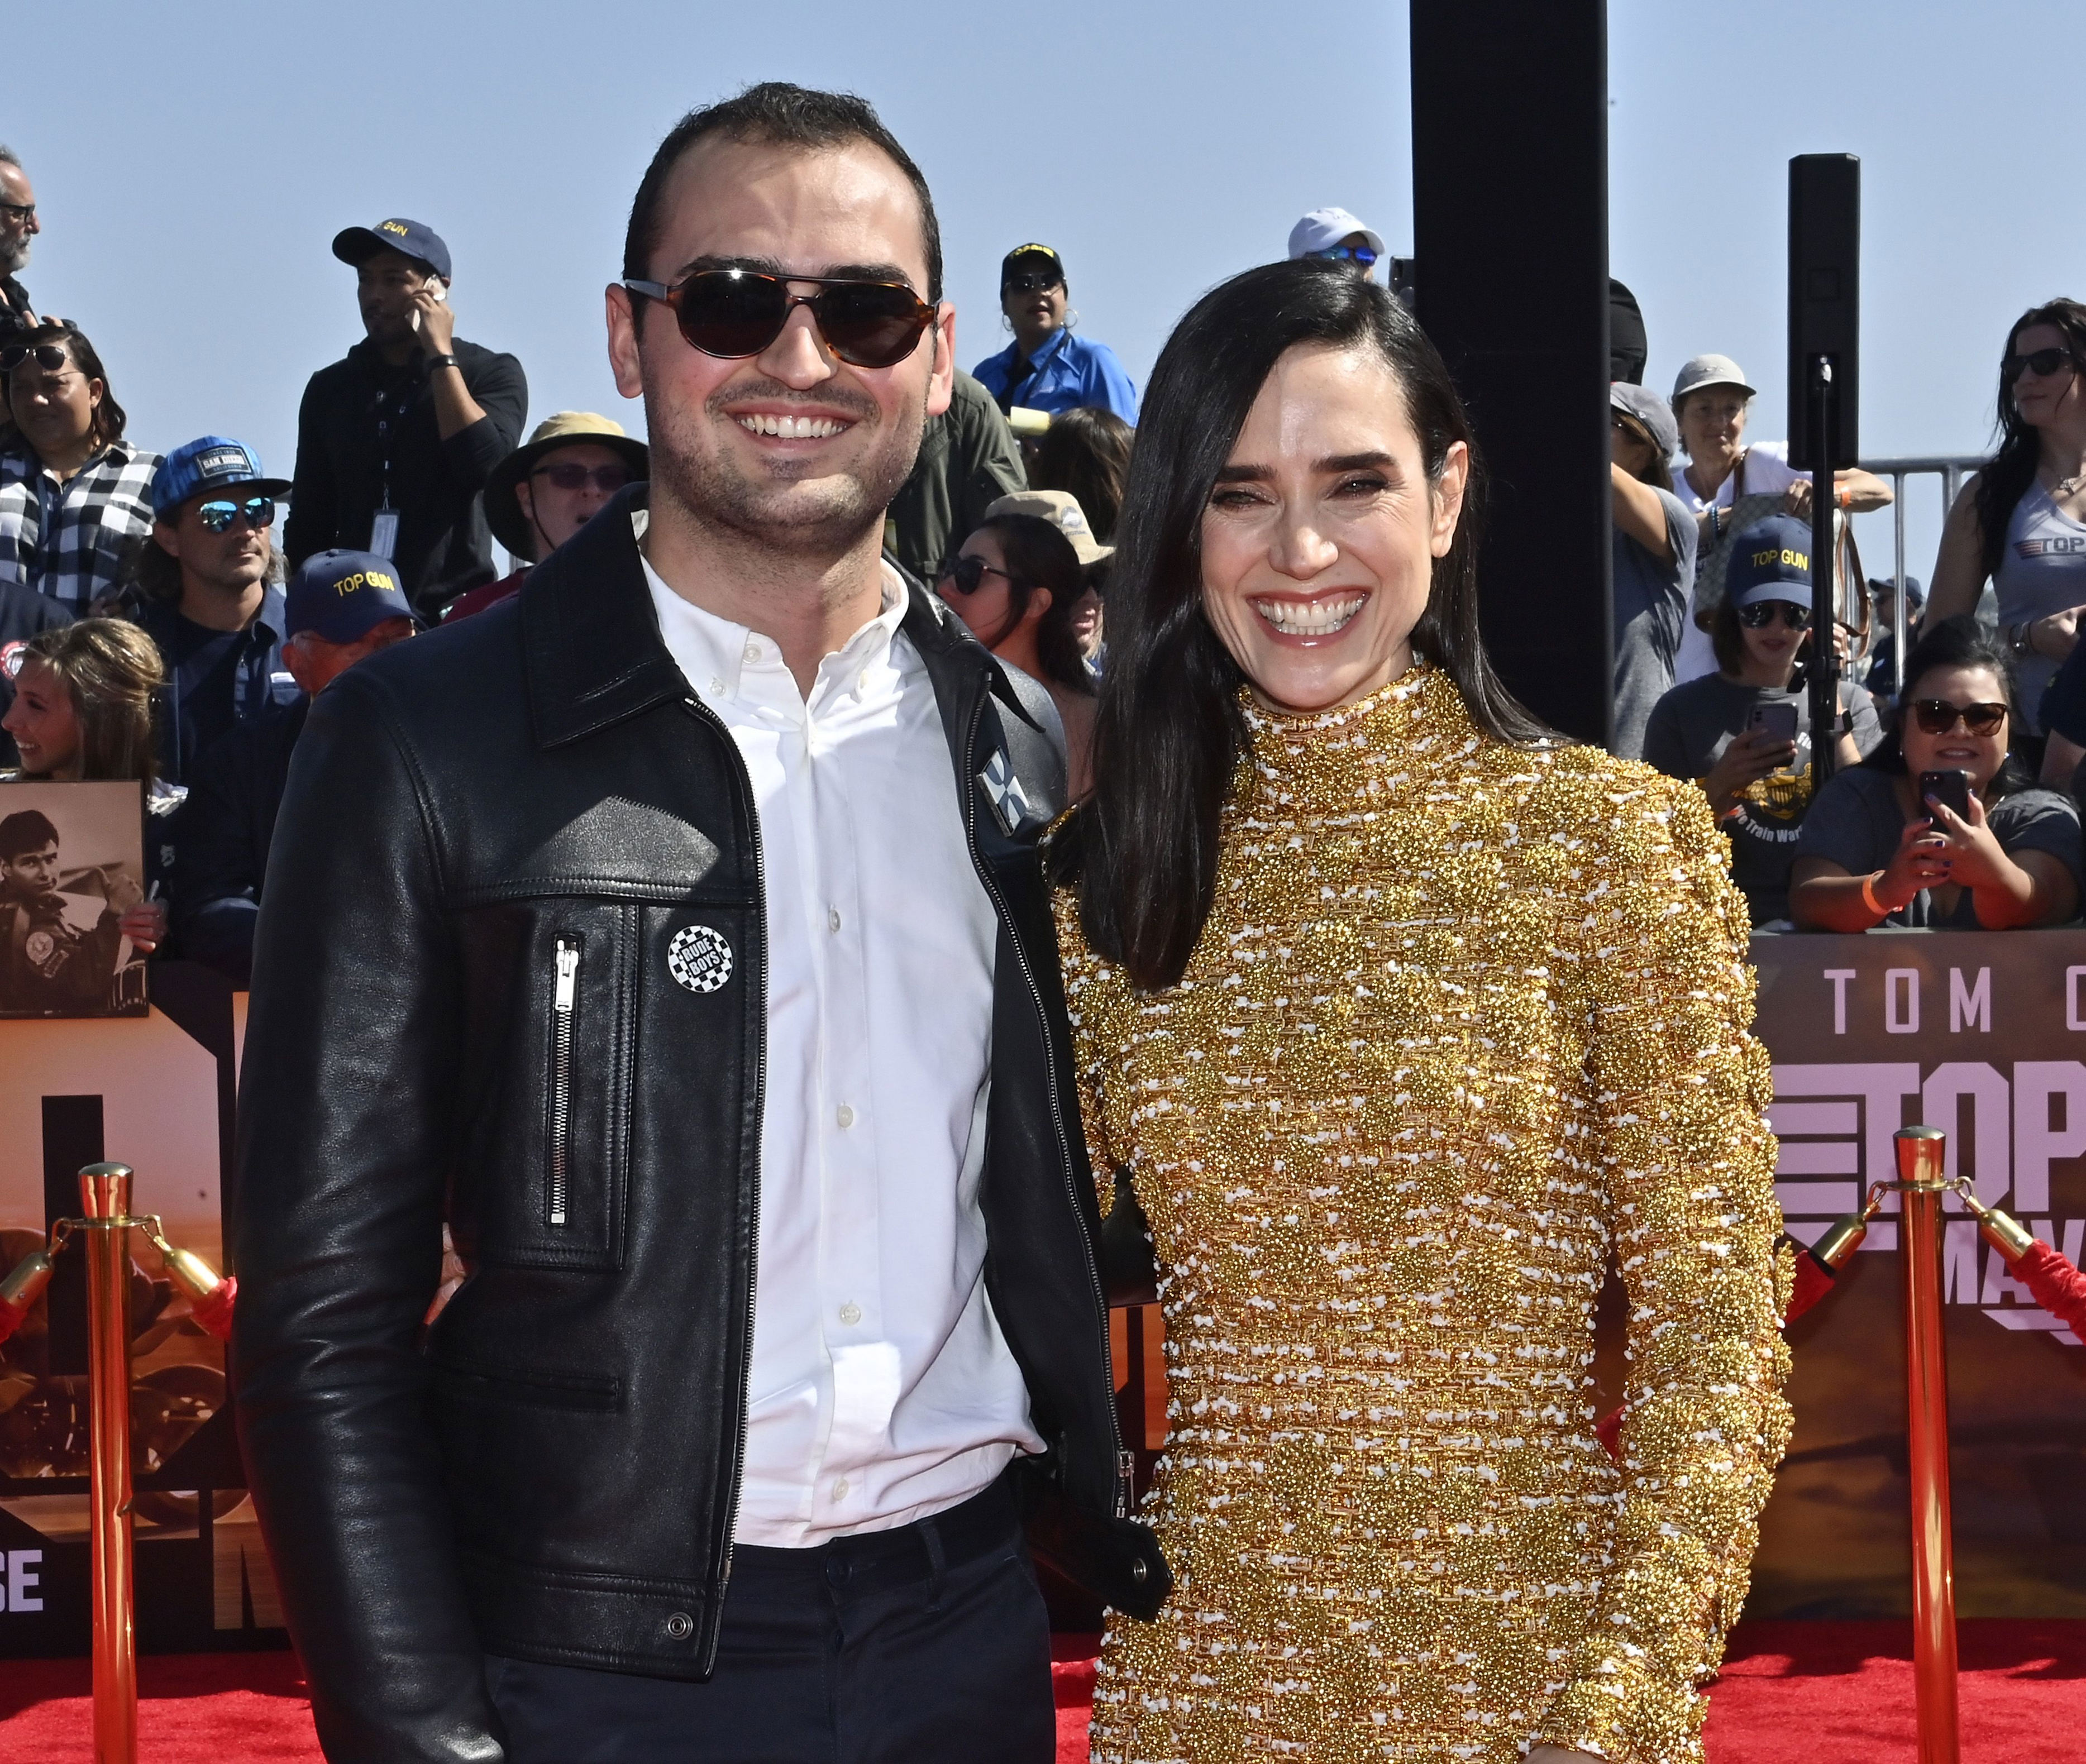 <p>Jennifer Connelly posed on the red carpet with son Kai Dugan (who was born in 1997) at the premiere of her movie "Top Gun: Maverick" in San Diego on May 4, 2022. Keep reading to see her younger son, Stellan Bettany, as an adult...</p>